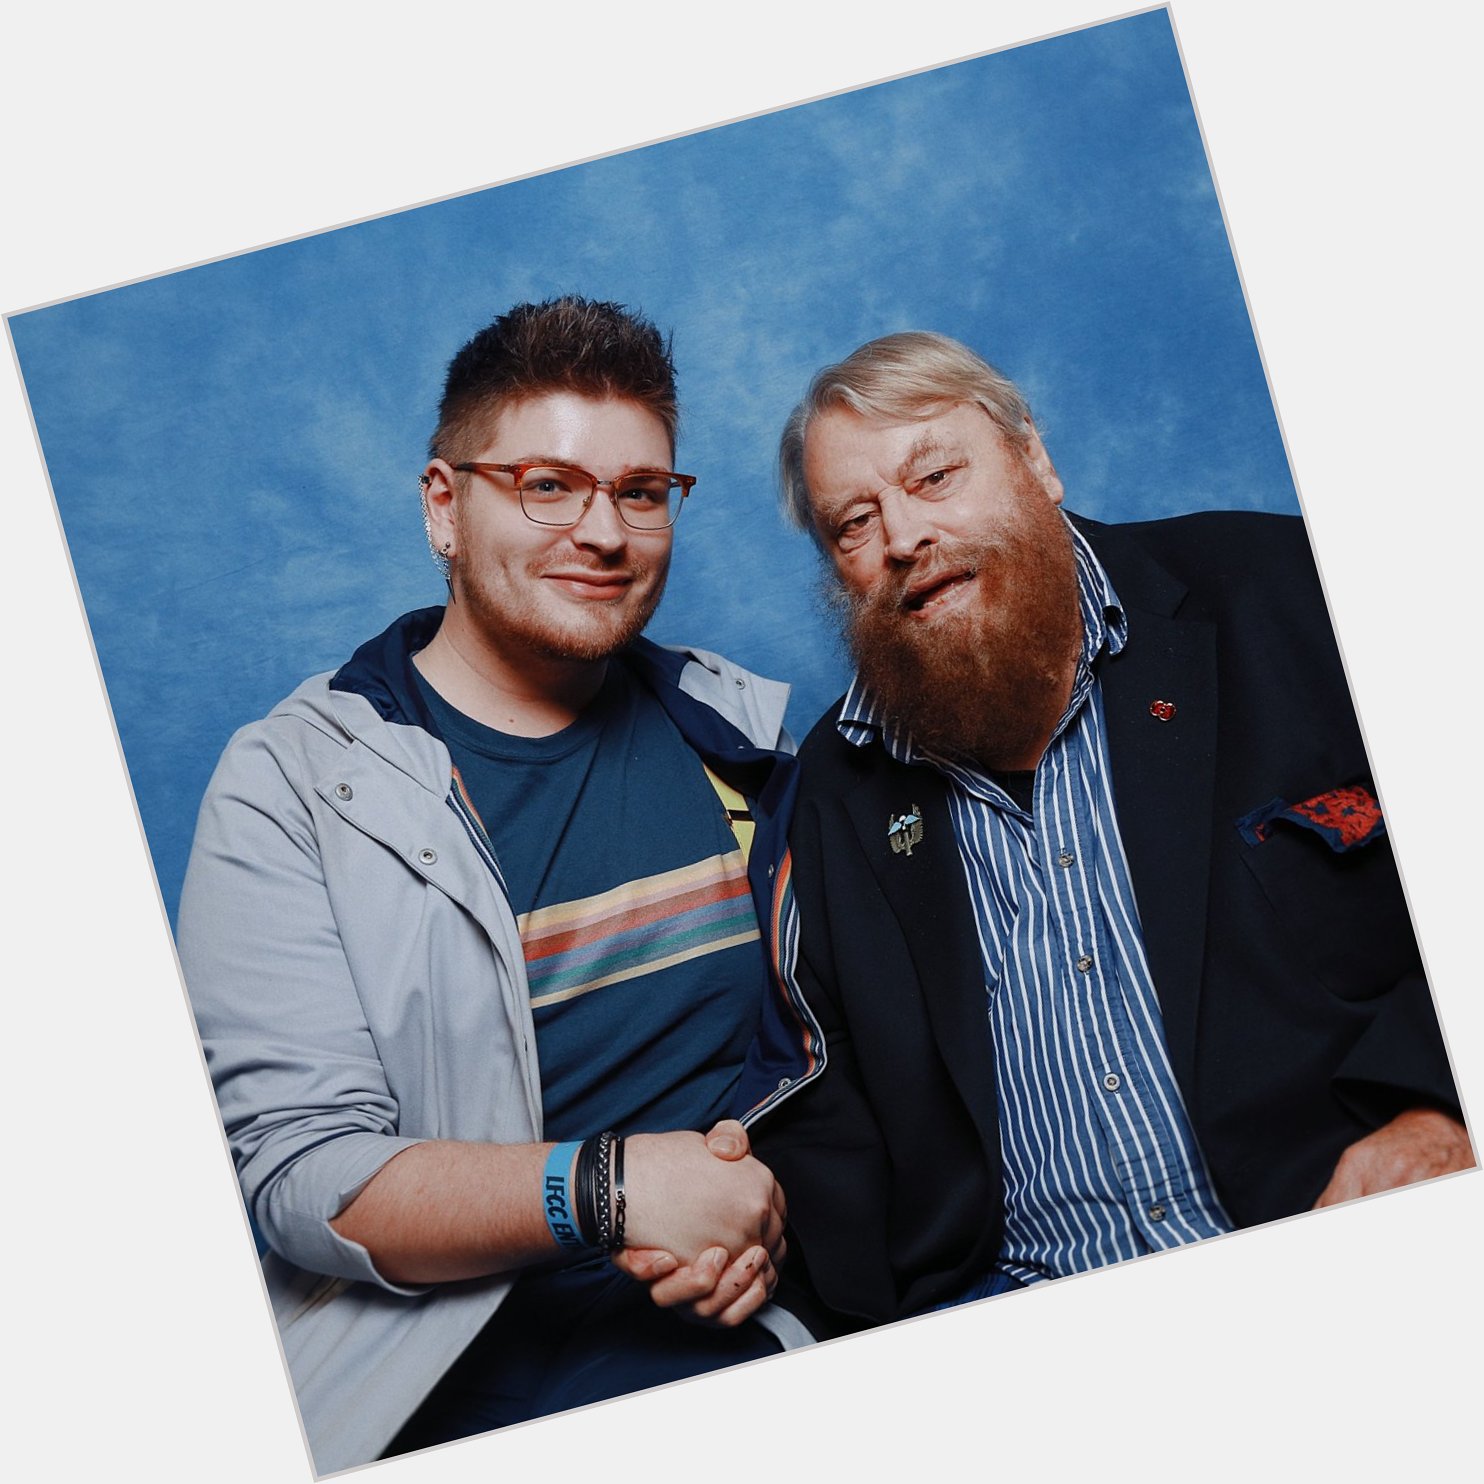 Happy Birthday to the Warrior King, Brian Blessed!
VAROONICK! 